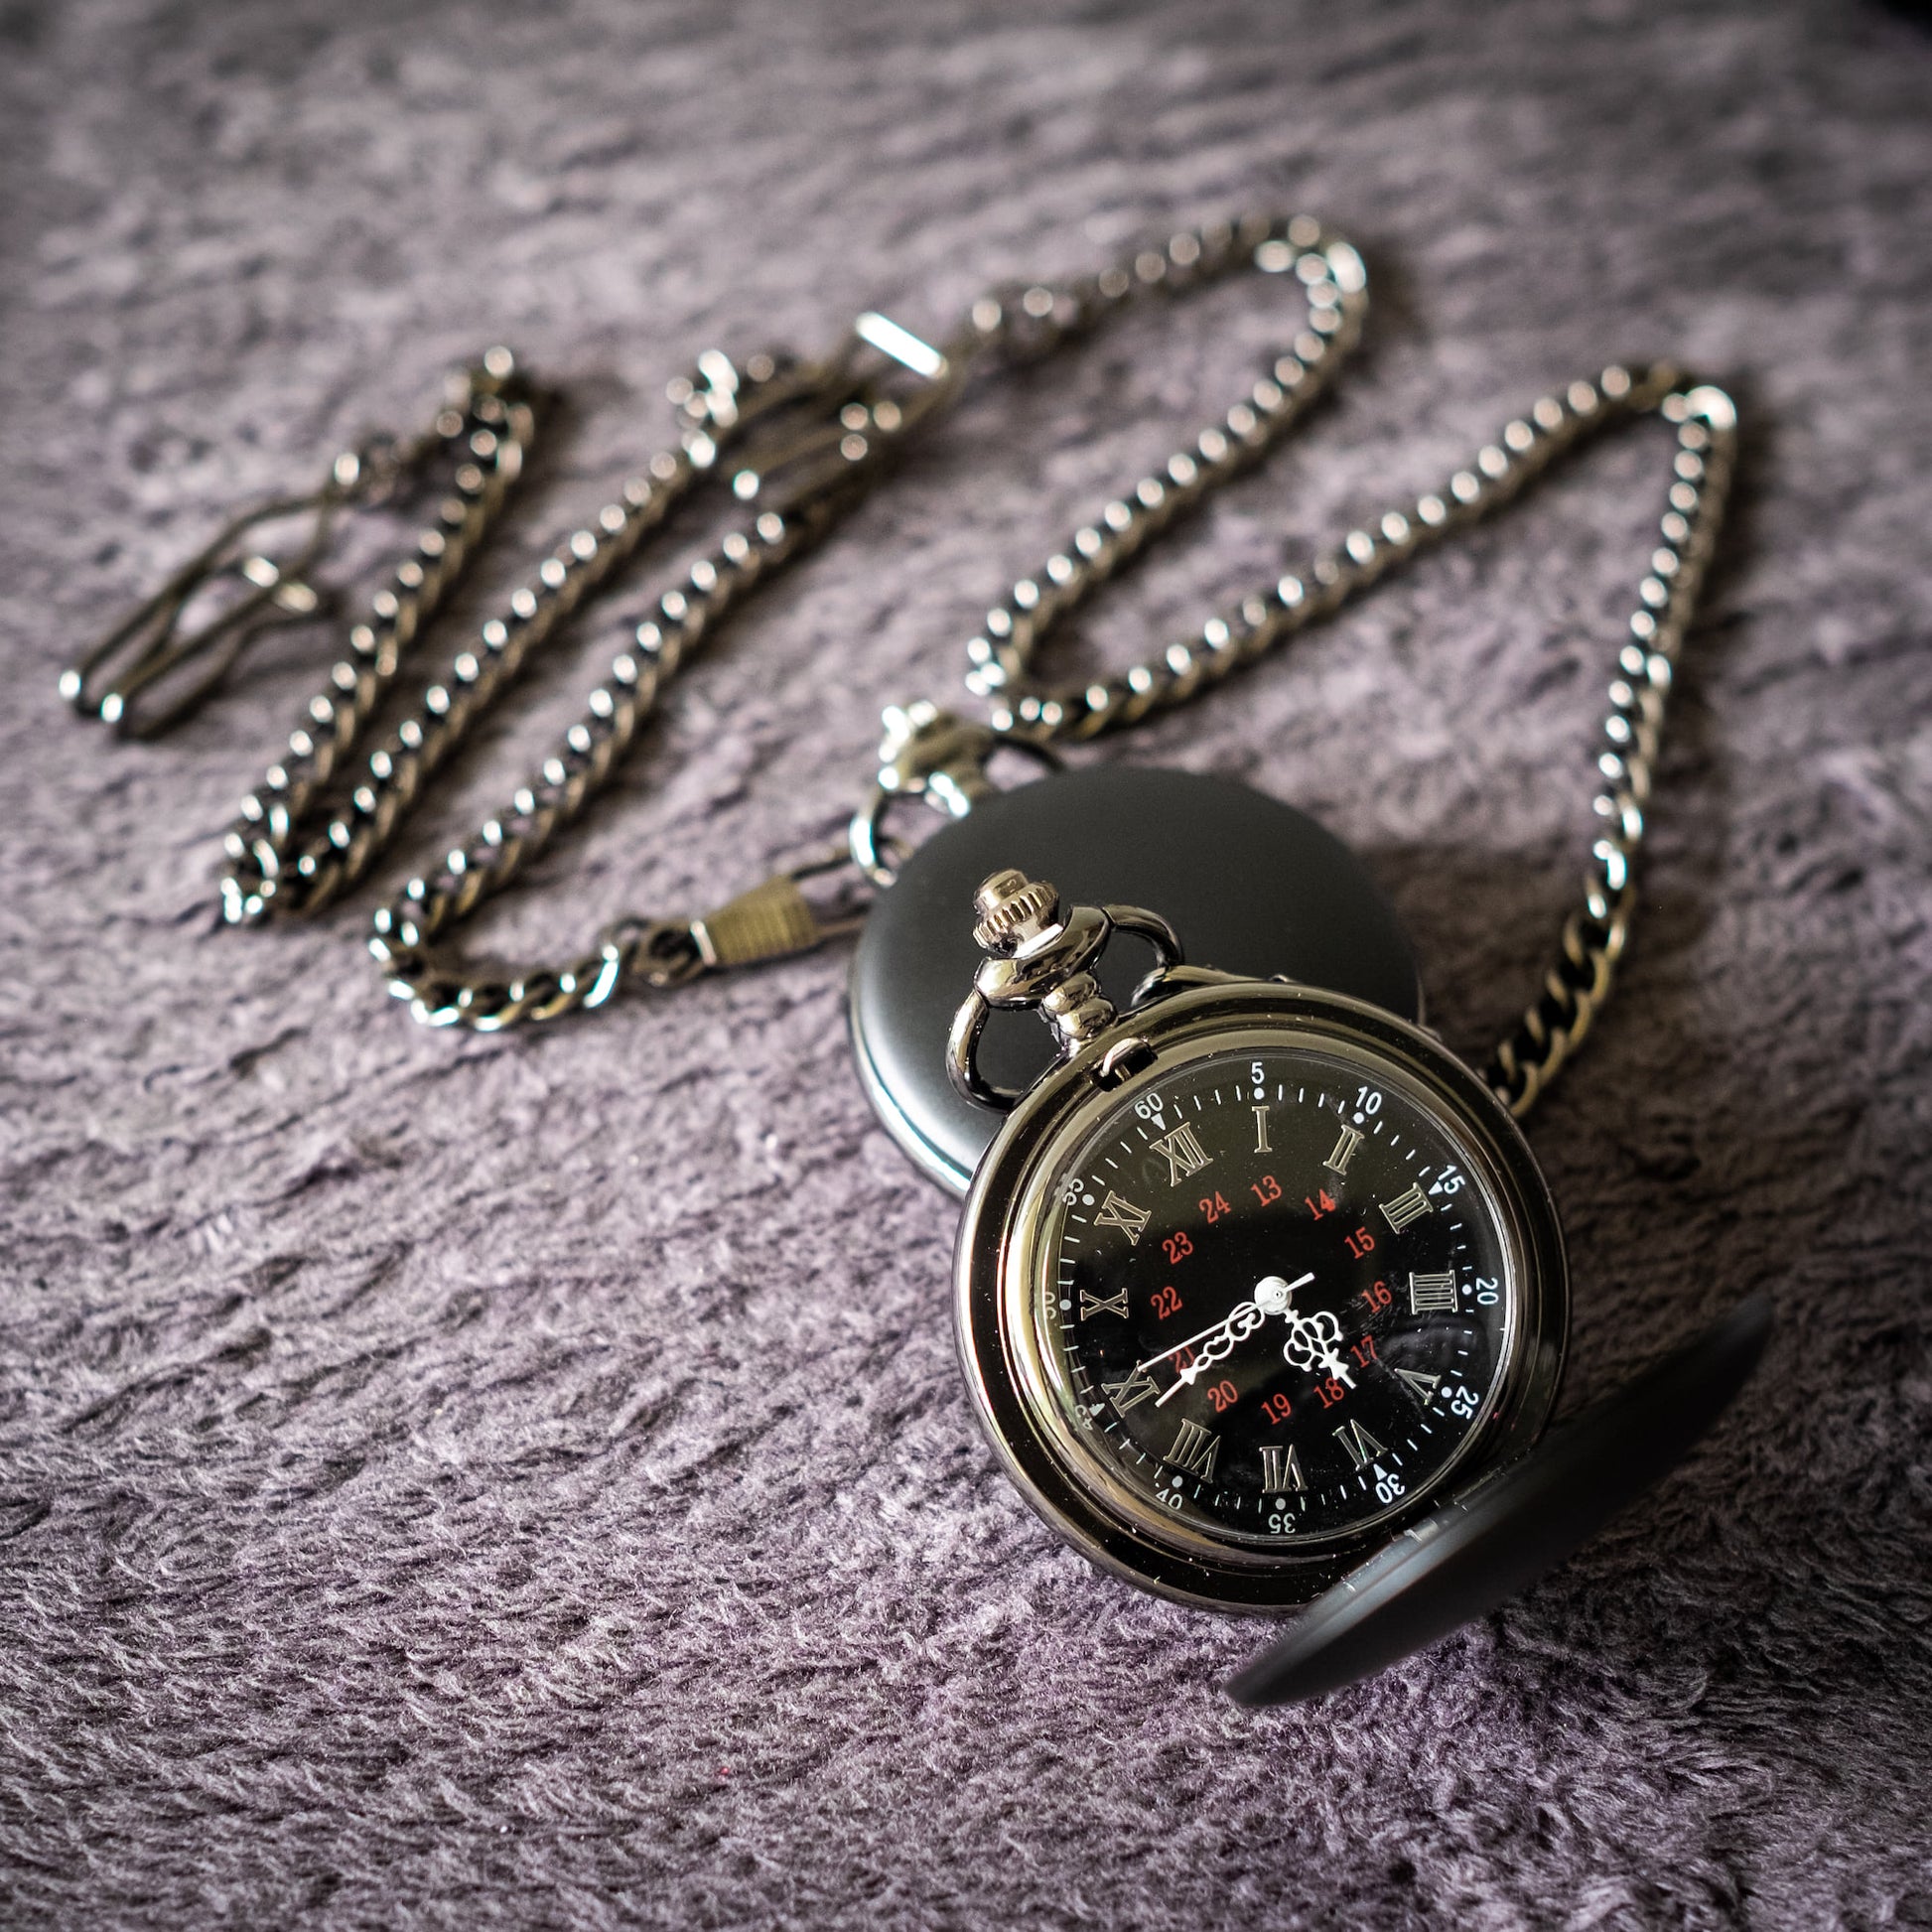 To My Grandson Pocket Watch from Granny, Gift for Grandson, Black Engraved Pocket Watch, You are Braver, Birthday, Christmas Gift.